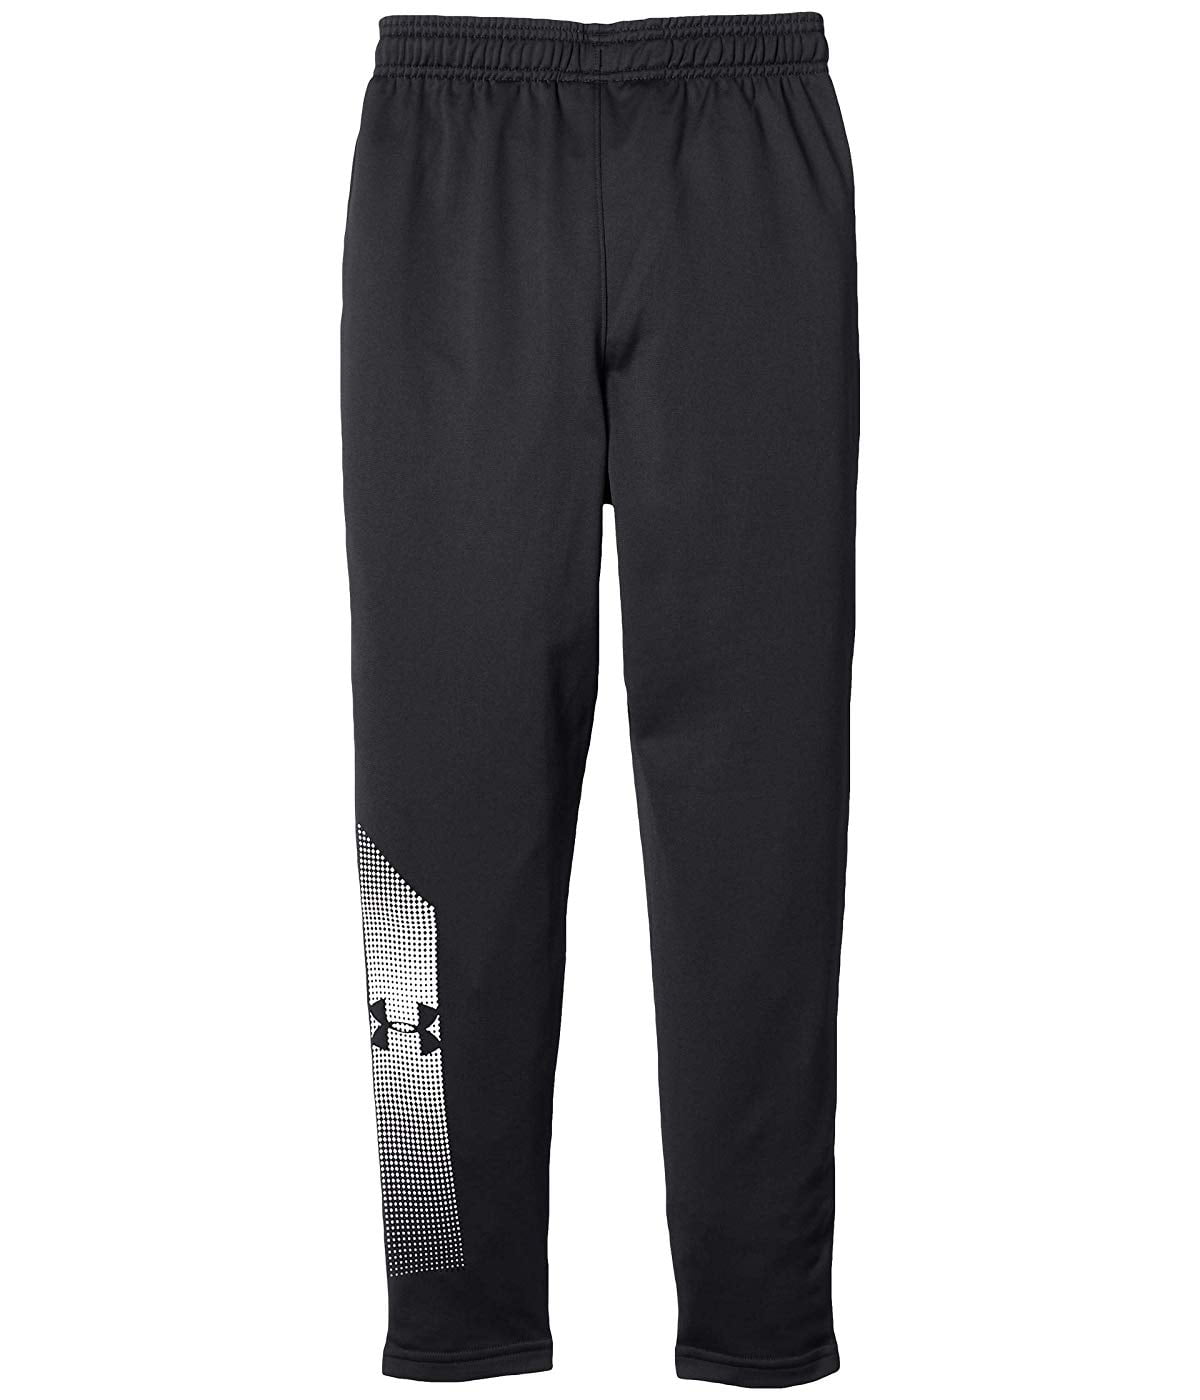 Under Armour Boys' Brawler Tapered Training Pants , Black (001)/White ,  Youth X-Small 